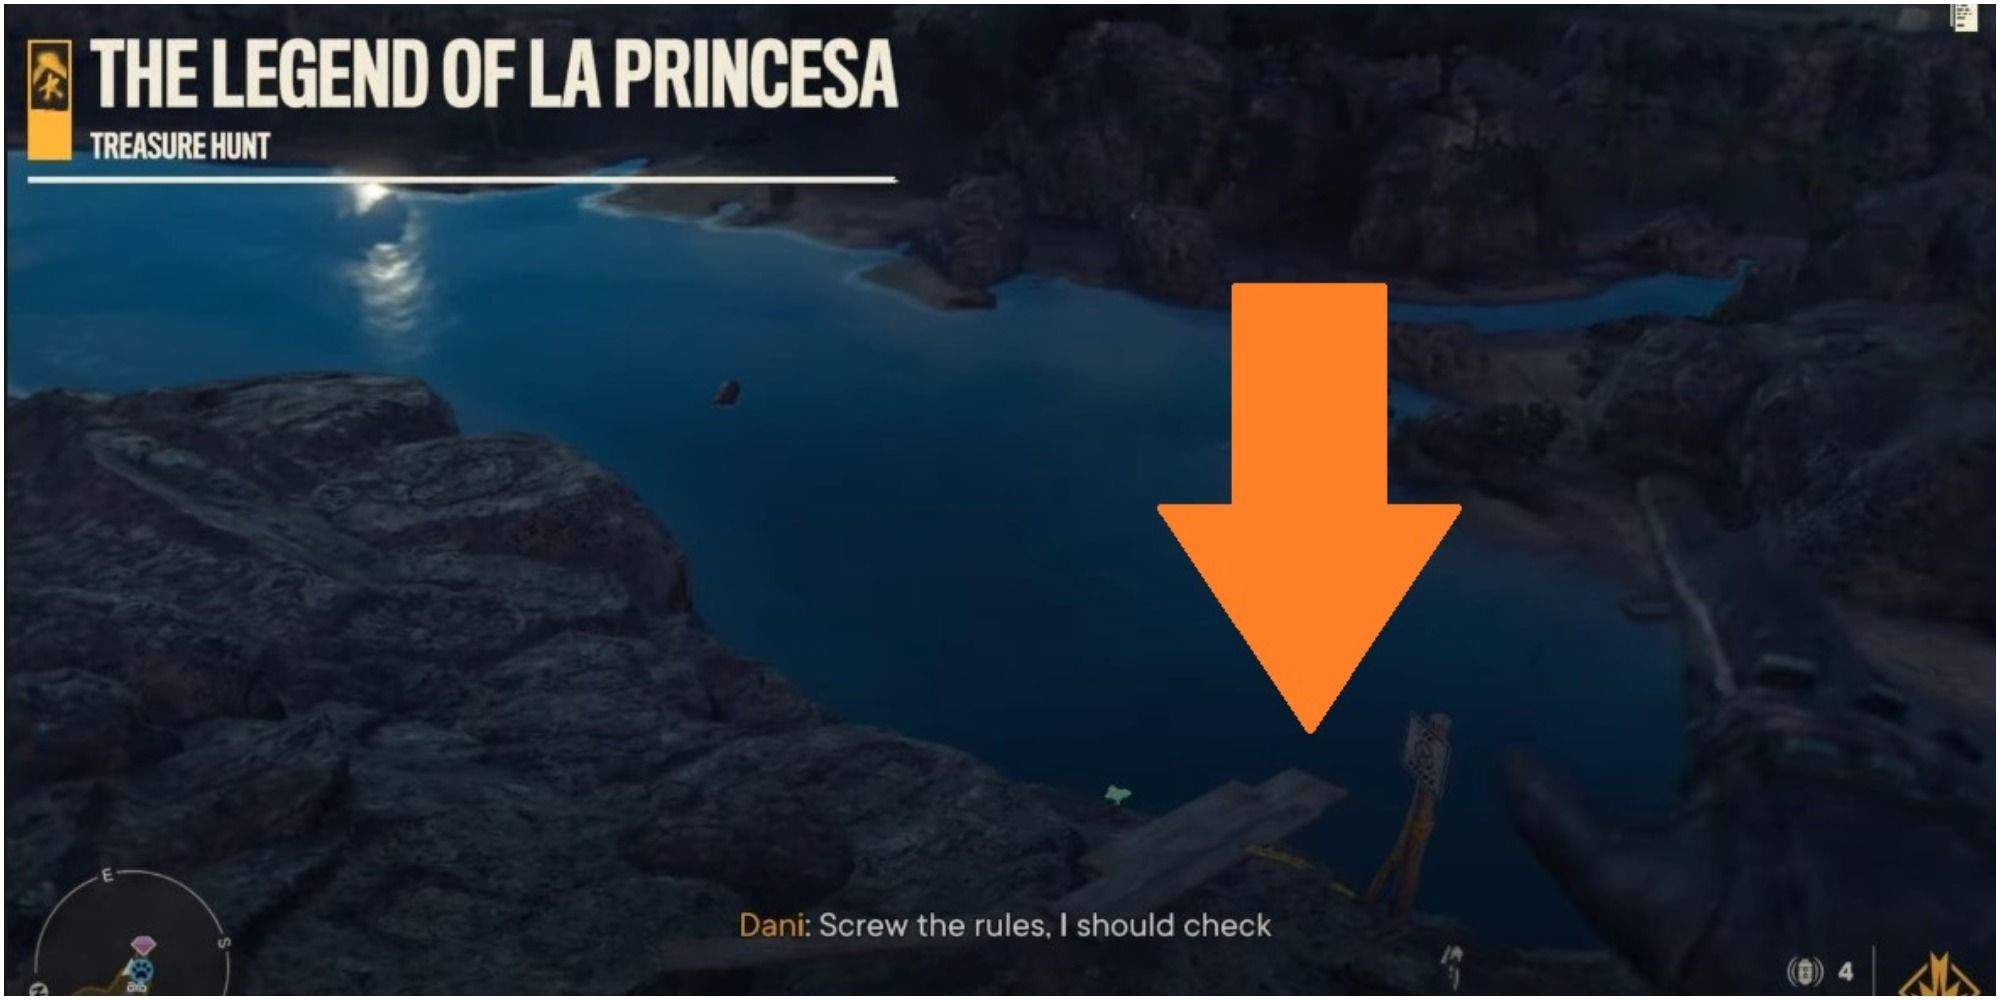 Far Cry 6 Place To Dive To Find The La Princesa Treasure Hunt Starting Point